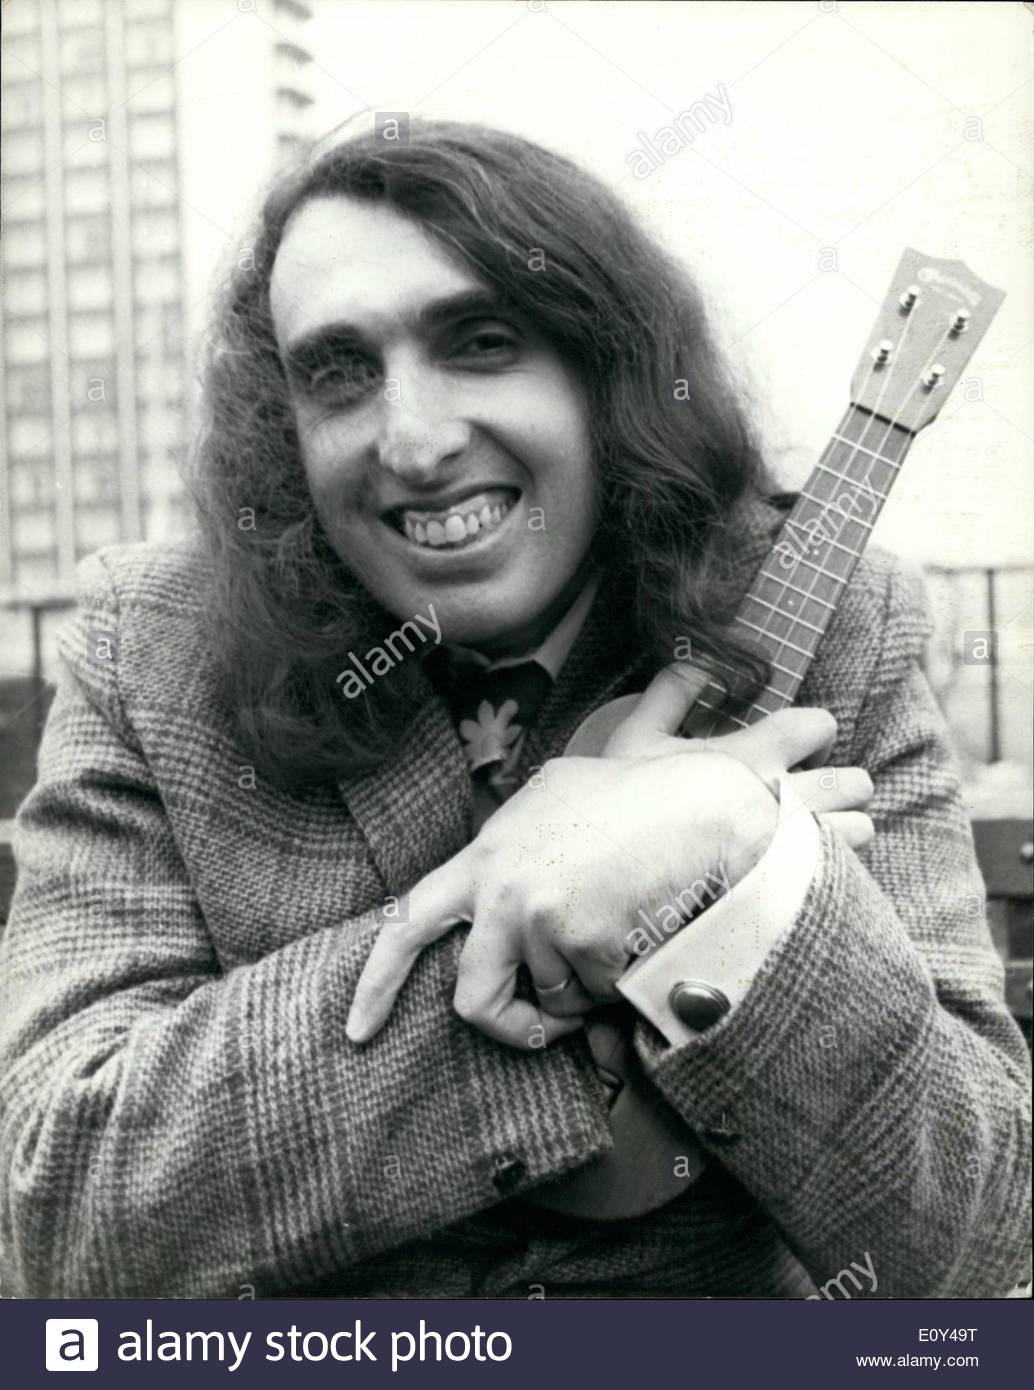 oct-10-1968-tiny-tim-of-the-pop-world-arrived-in-britain-tiny-tim-E0Y49T.jpg